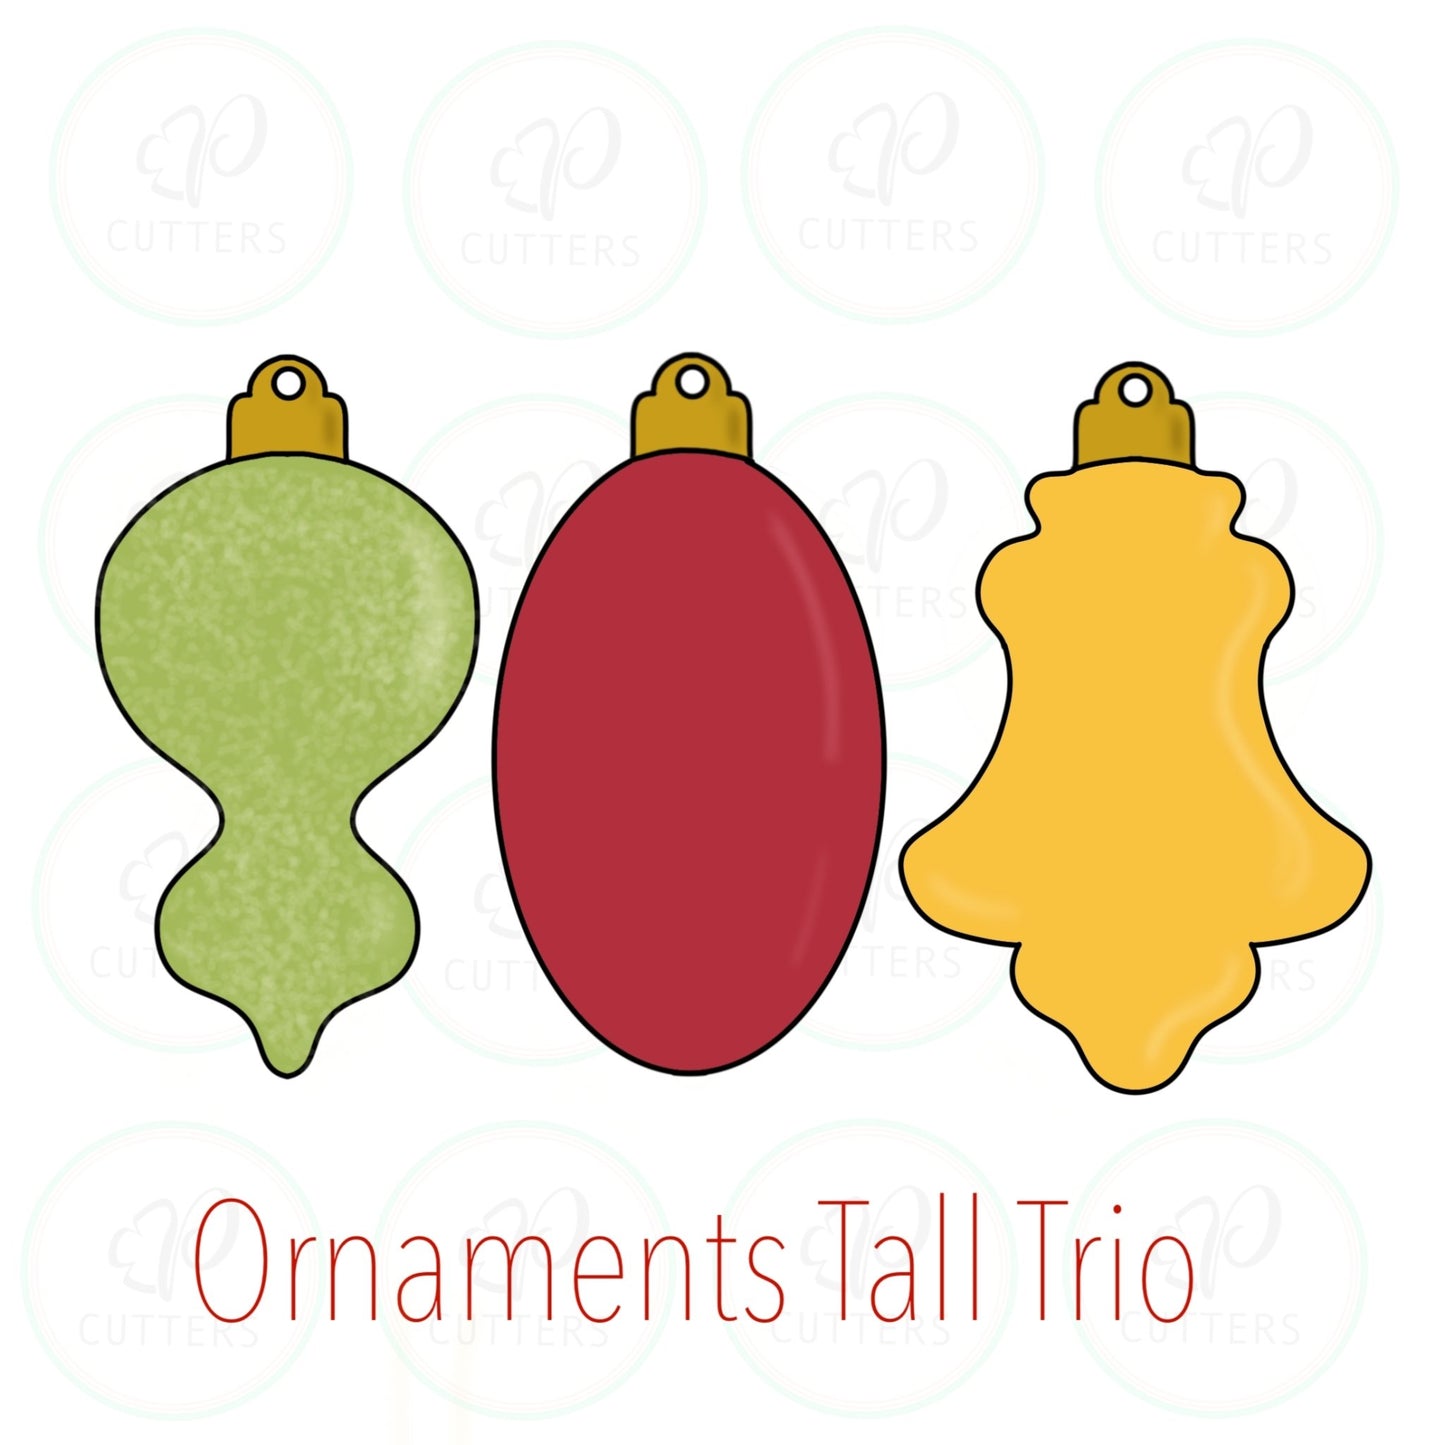 Vintage Ornaments - Ornaments Tall Trio - Christmas Decor - Periwinkles Cutters